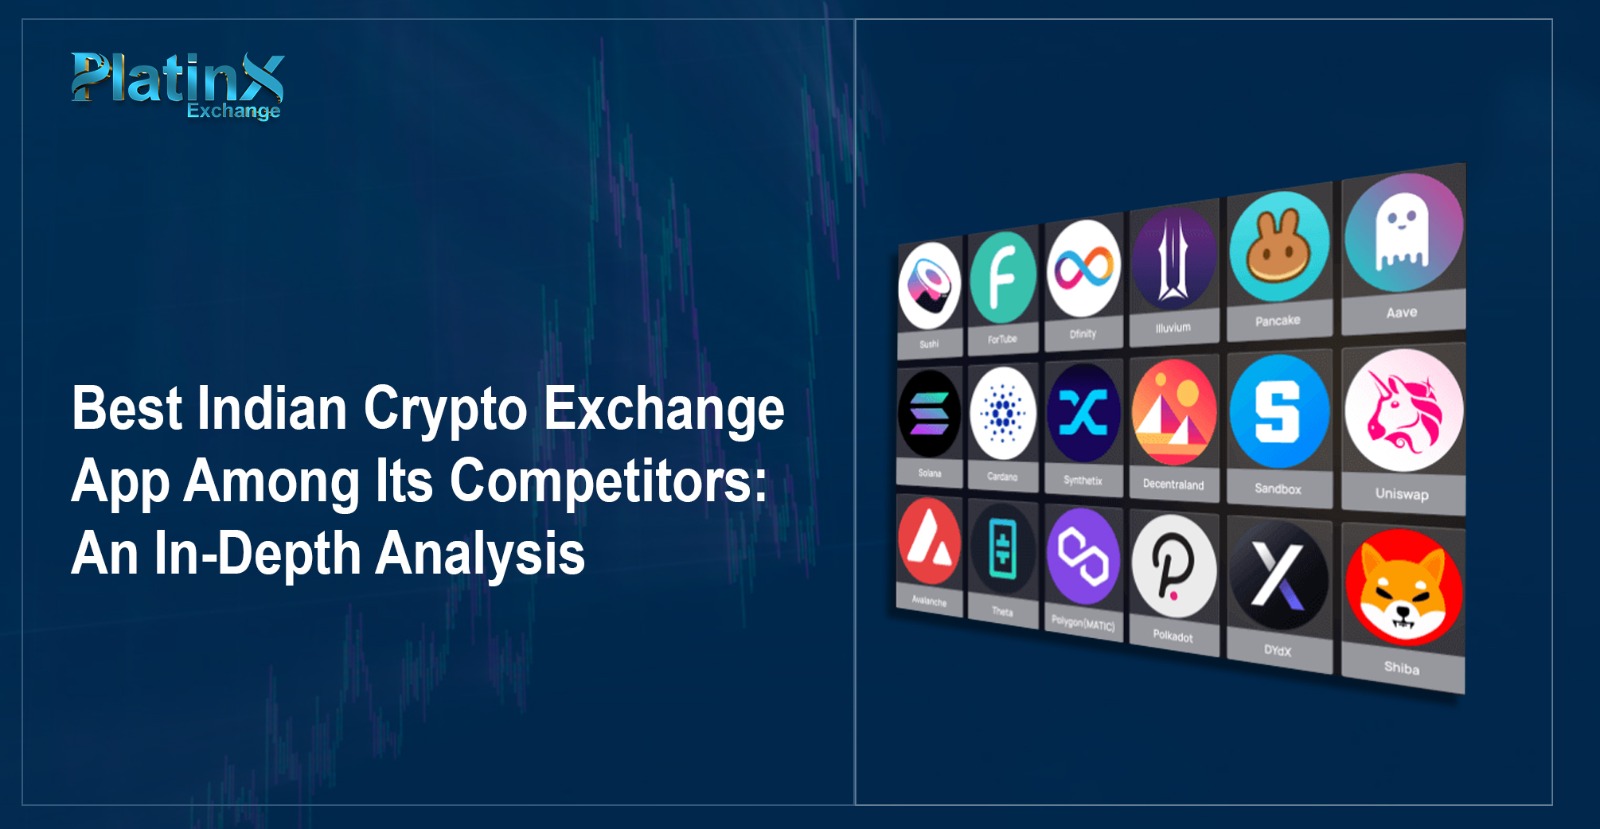 Best Indian Crypto Exchange App Among Its Competitors